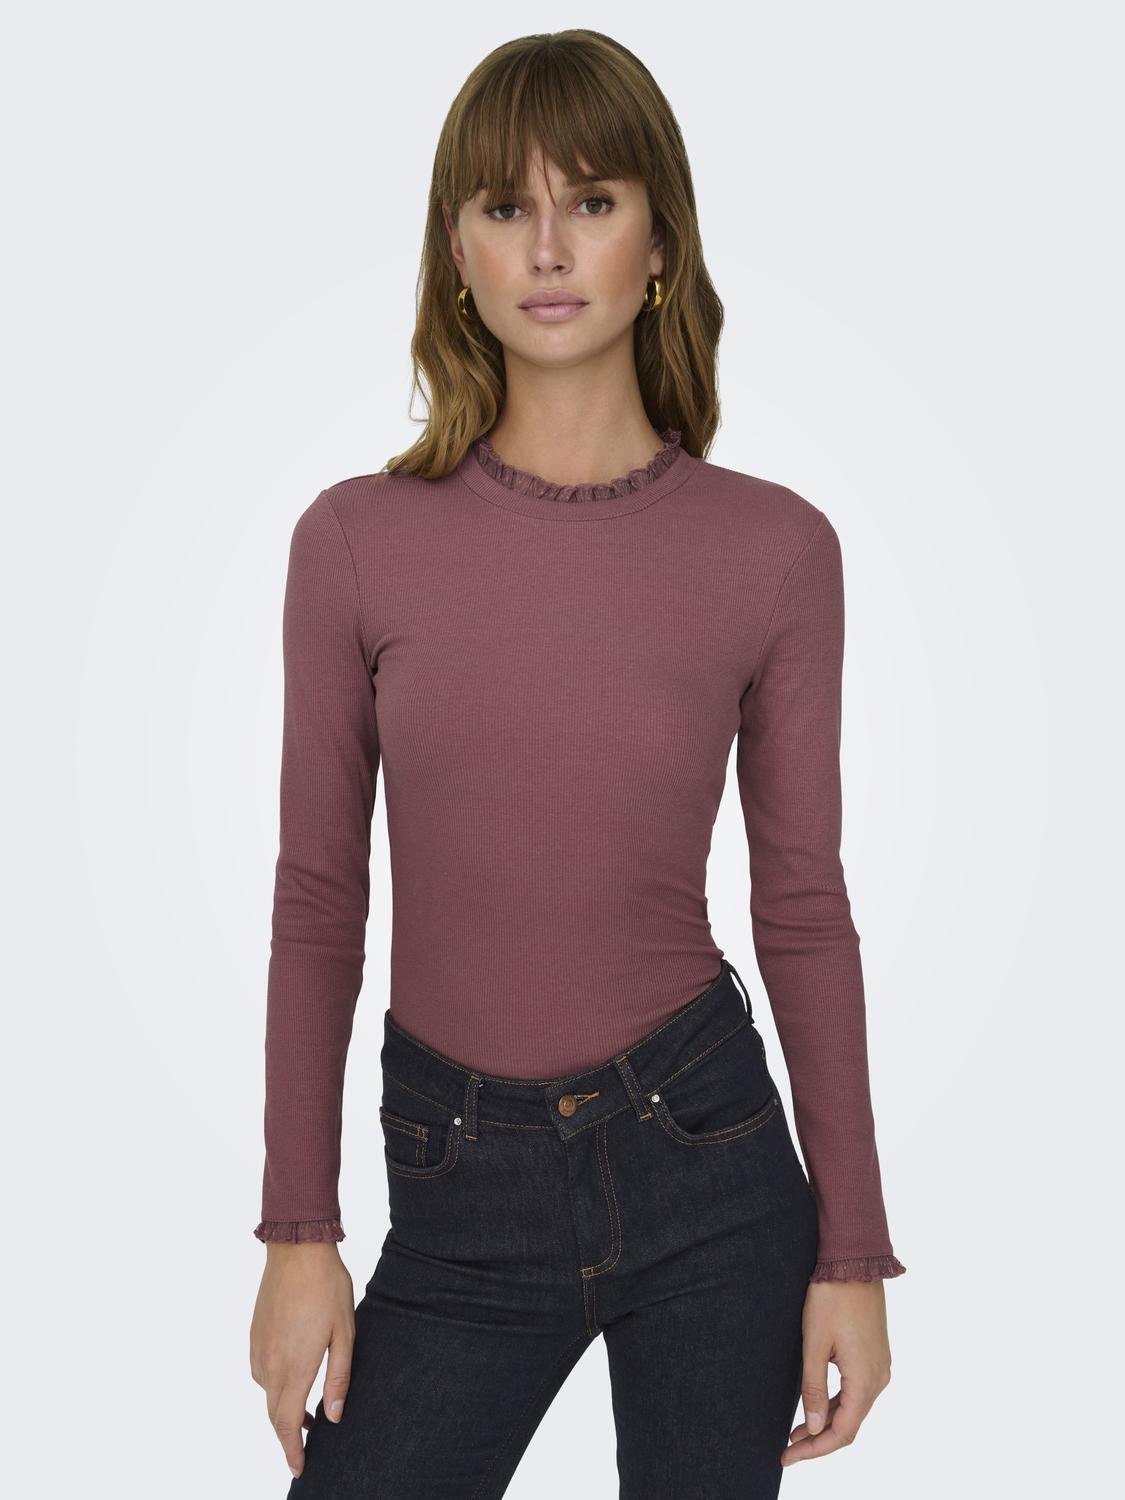 ONLY Long sleeved Top -Rose Brown - 15277888